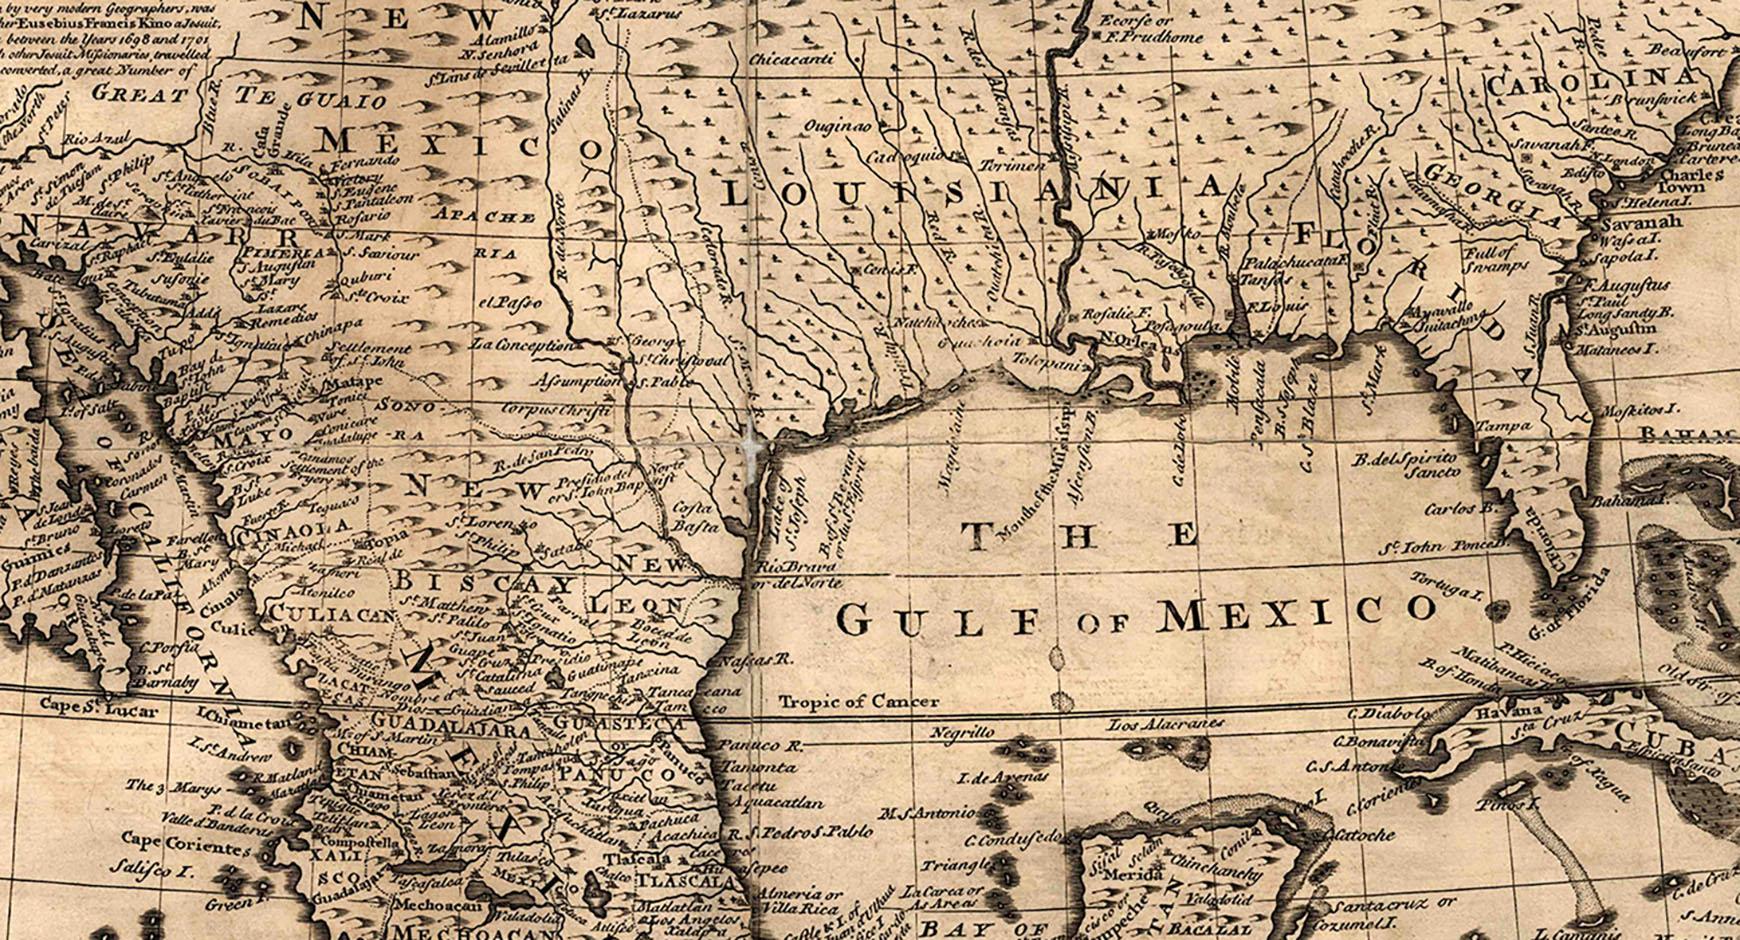 old map of the gulf coast of the united states